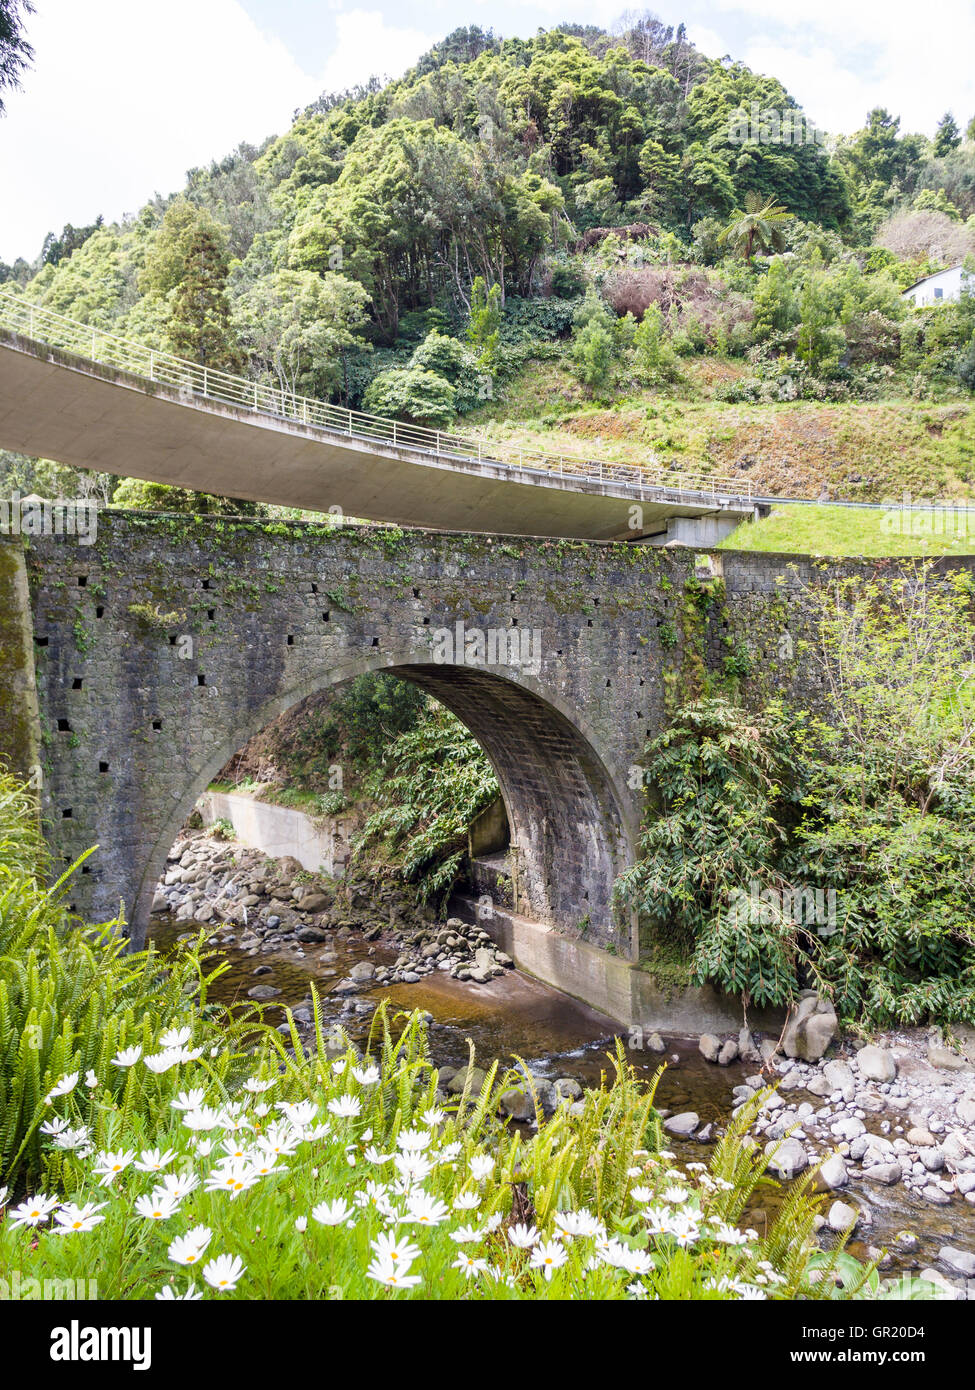 Old and New Bridges. An old stone arched bridge over a stream with a new highway fly-over bridge above. Stock Photo